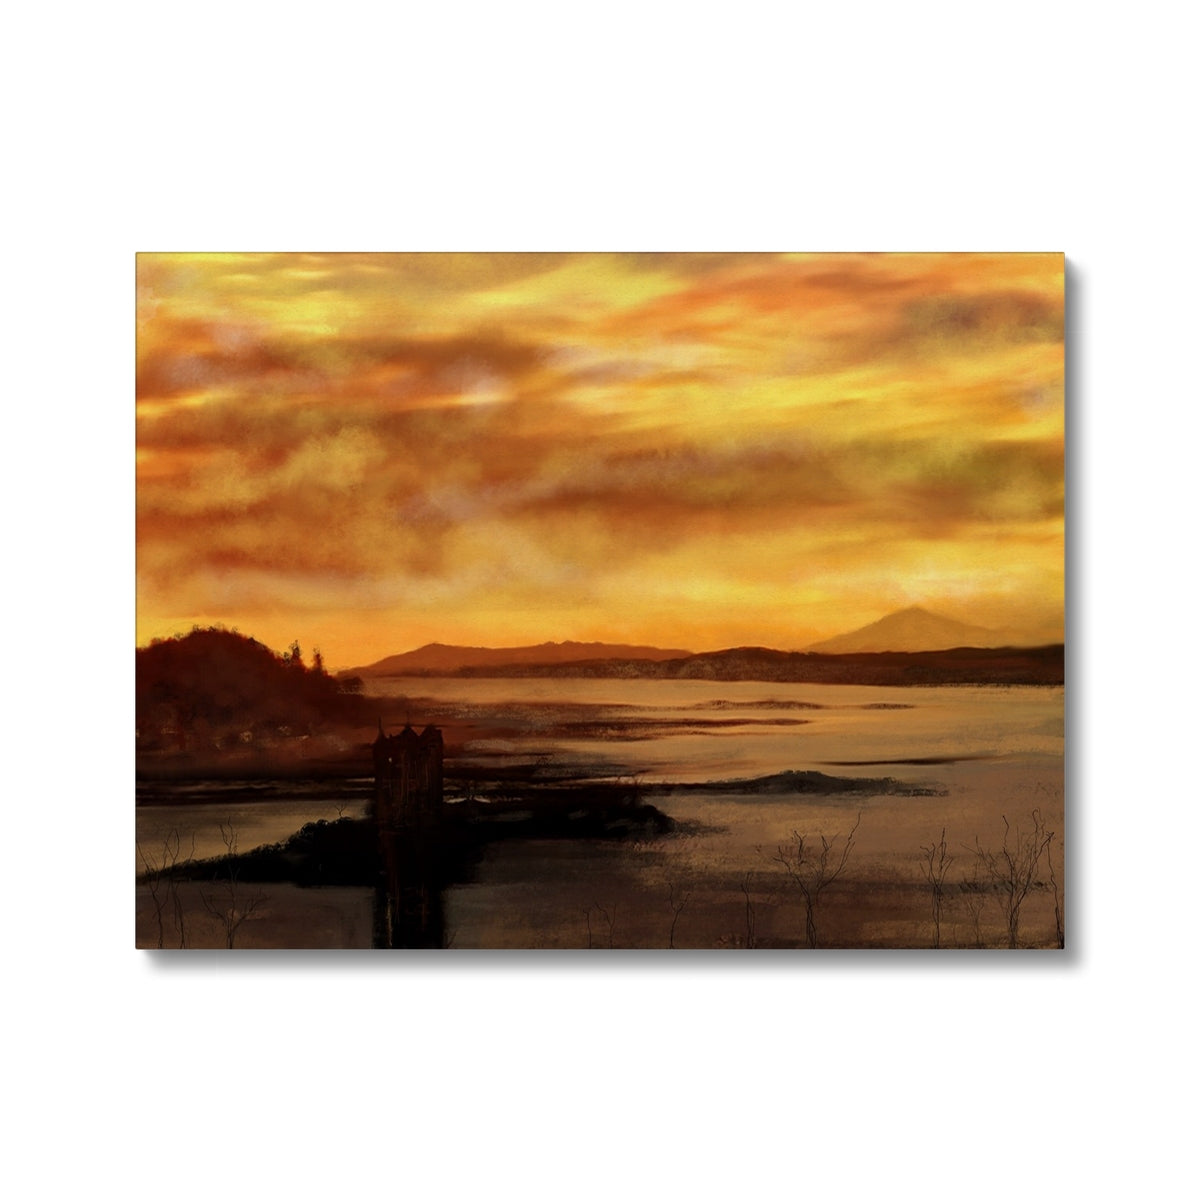 Castle Stalker Dusk Painting | Canvas From Scotland-Contemporary Stretched Canvas Prints-Historic & Iconic Scotland Art Gallery-24"x18"-Paintings, Prints, Homeware, Art Gifts From Scotland By Scottish Artist Kevin Hunter